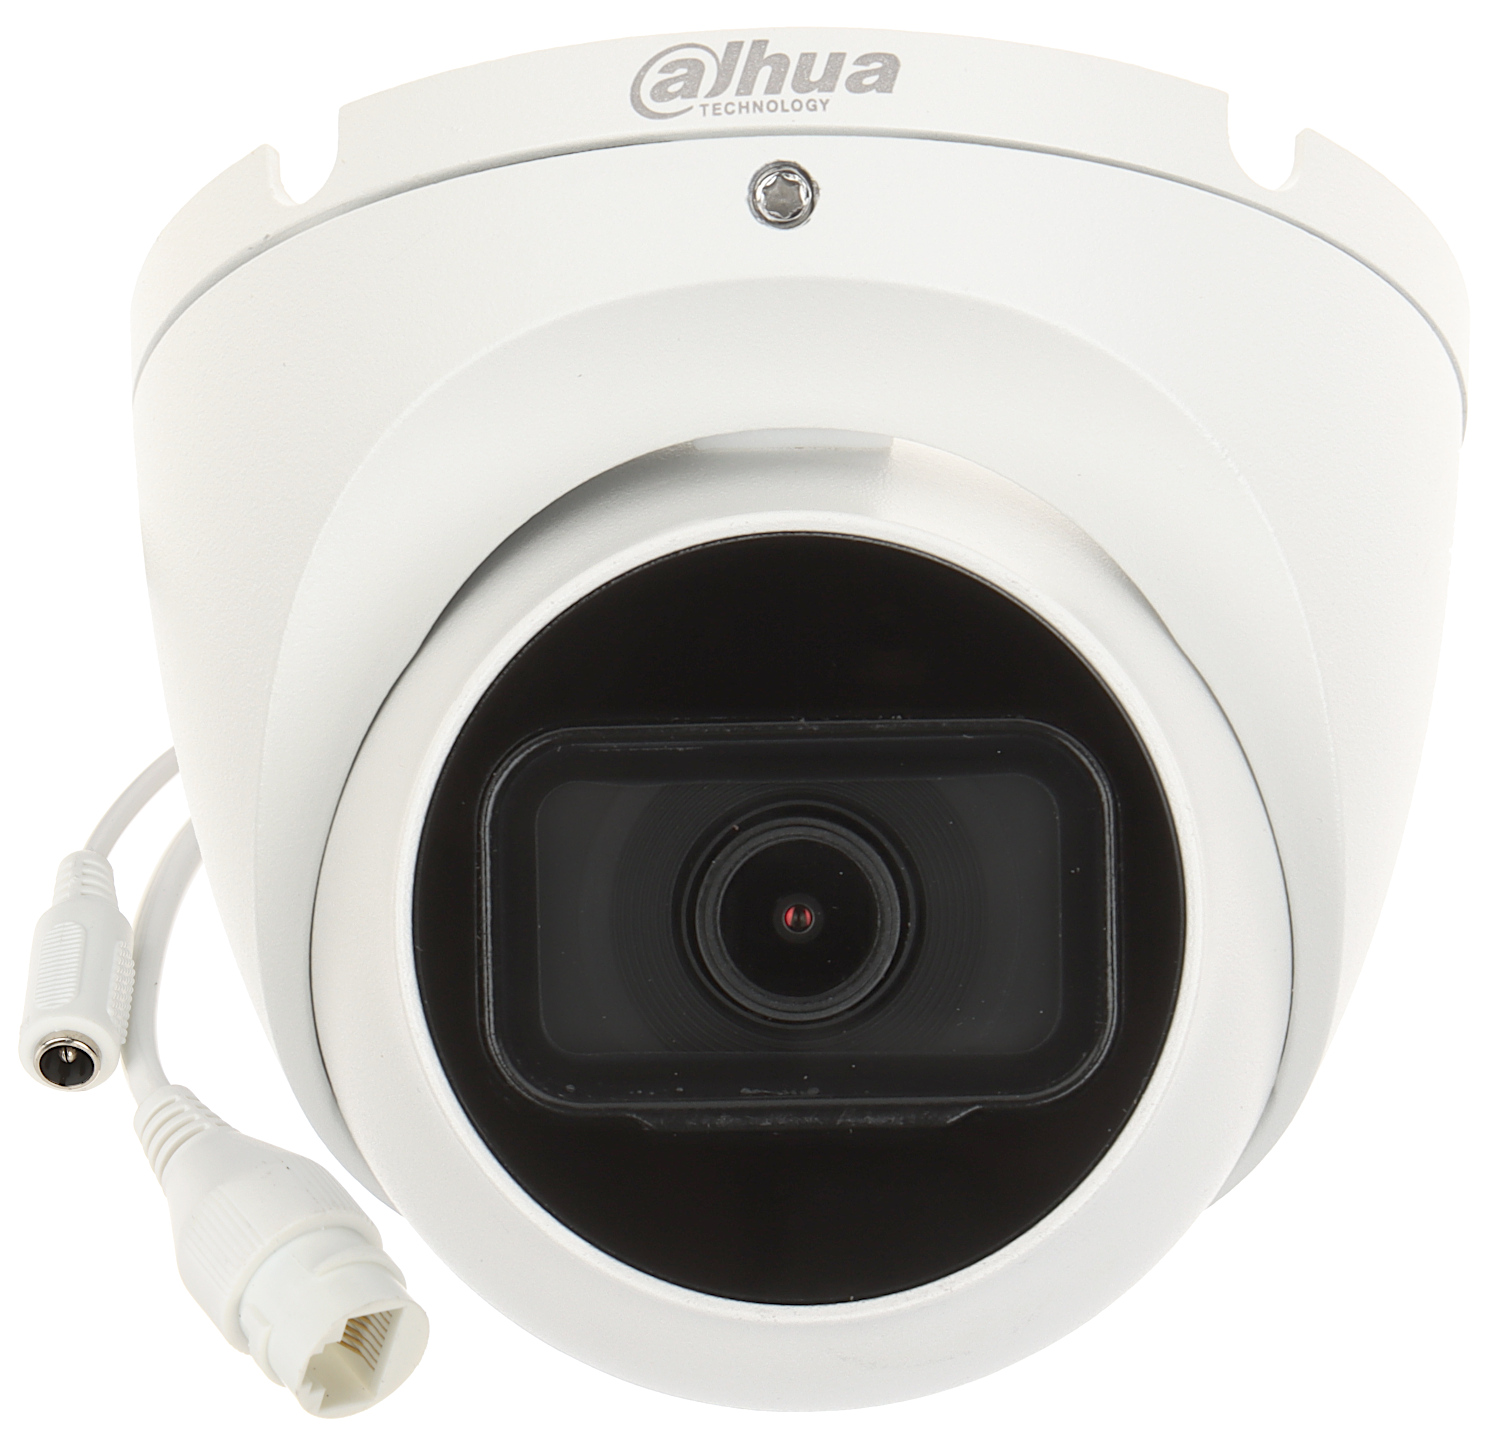 IP CAMERA IPC-HDW1530T-0280B-S6 - 5 Mpx 2.8 mm DAHUA - Dome Cameras with  Fixed-Focal Lens and Infra-Red Illum... - Delta